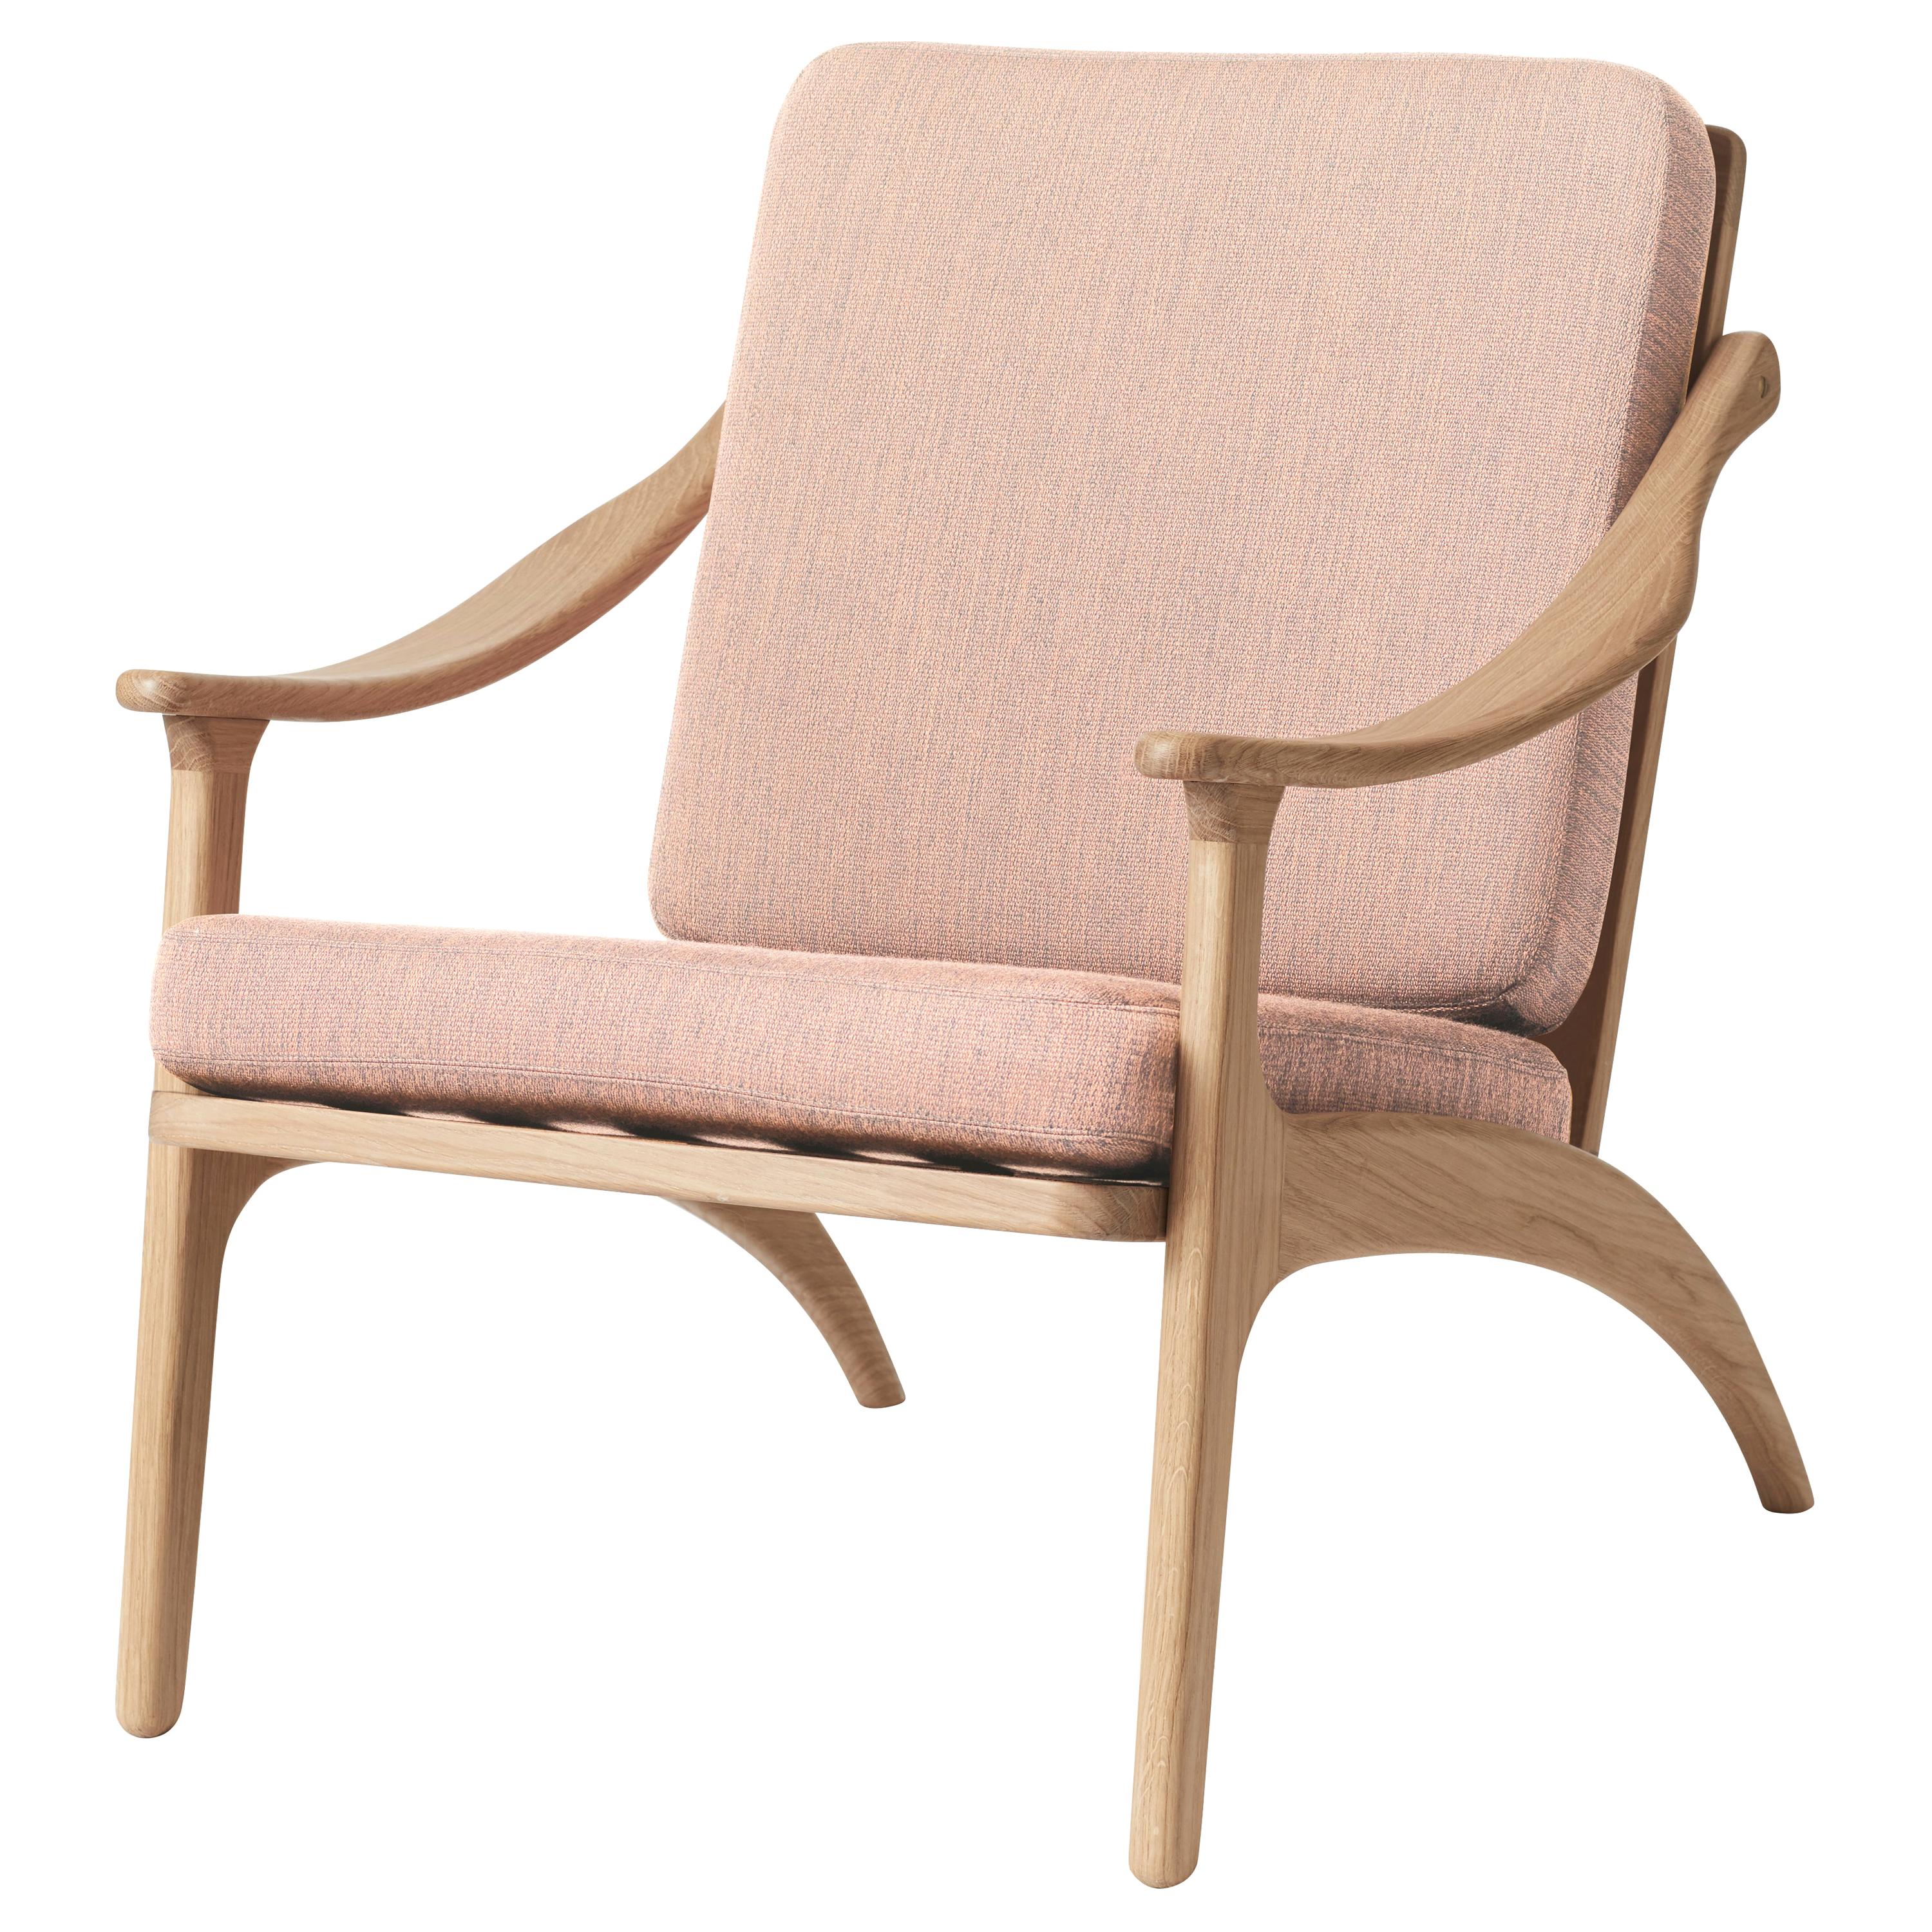 Customizable Lean Back Monochrome Lounge Chair in Oak, by Arne  Hovmand-Olsen from Warm Nordic For Sale at 1stDibs